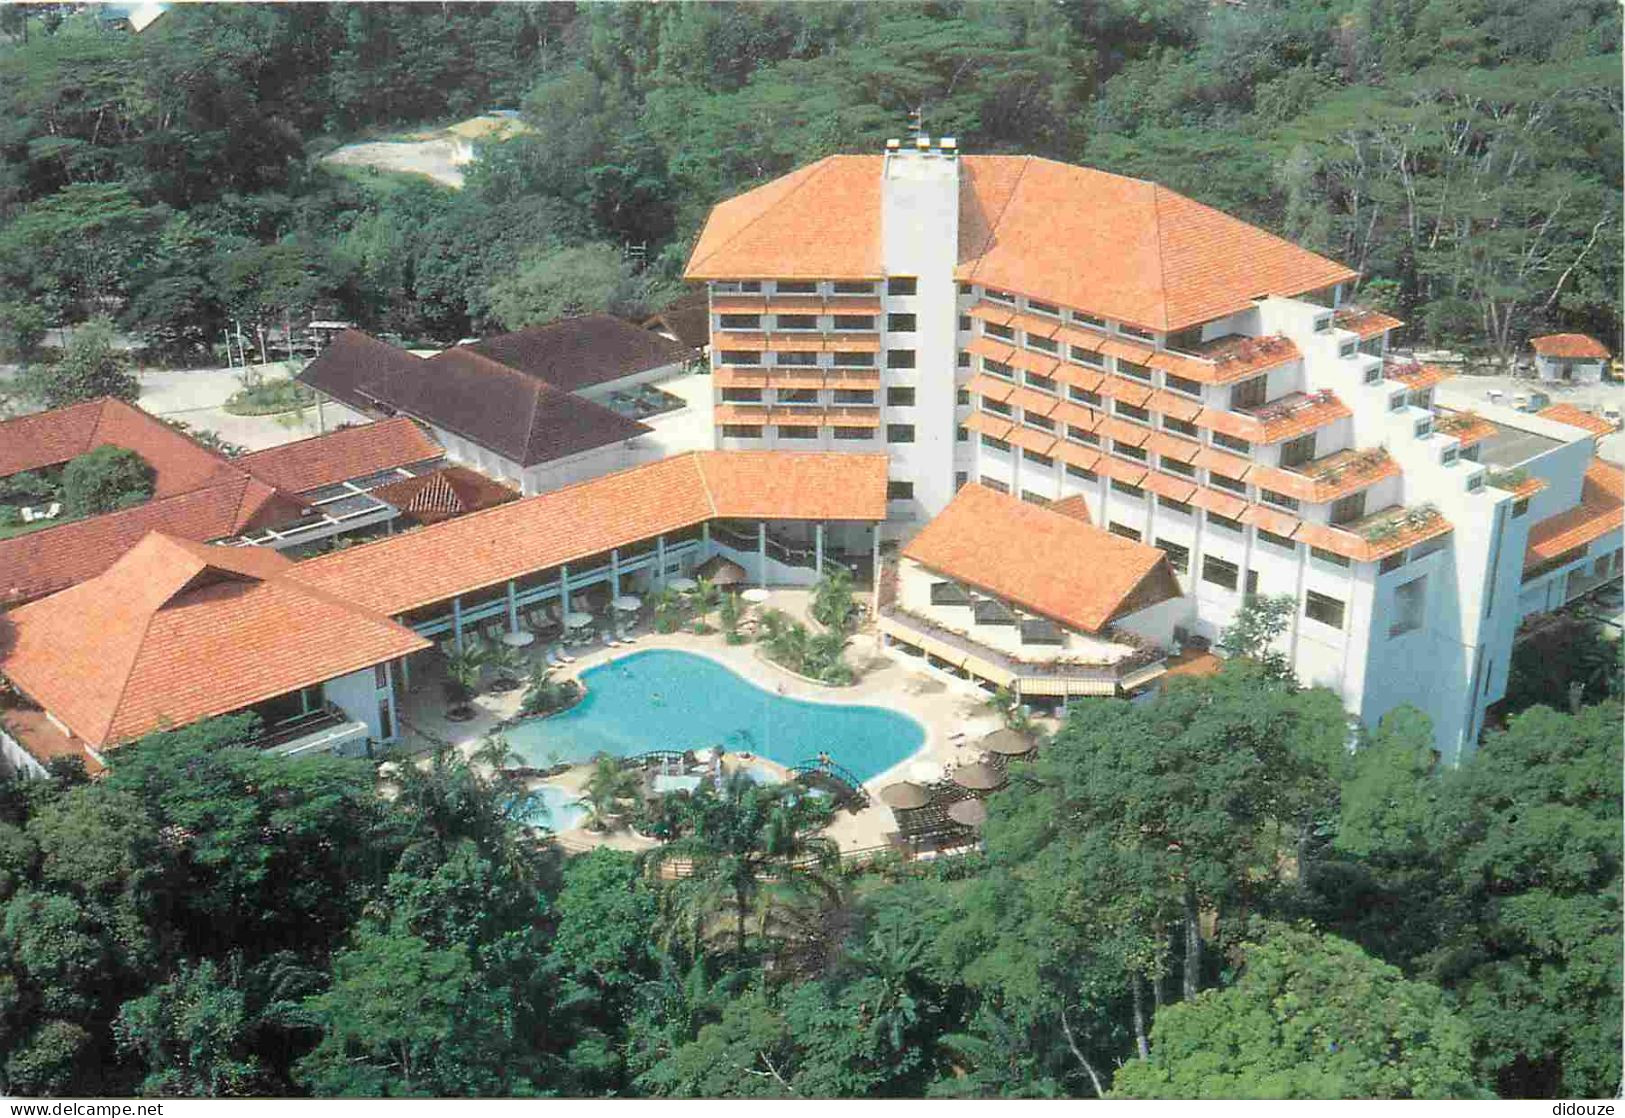 Malaisie - Sabah - Sandakan Renaissance Hotel - Aerial View Of The Hotel - Immeubles - Architecture - Malaysia - CPM - C - Malaysia